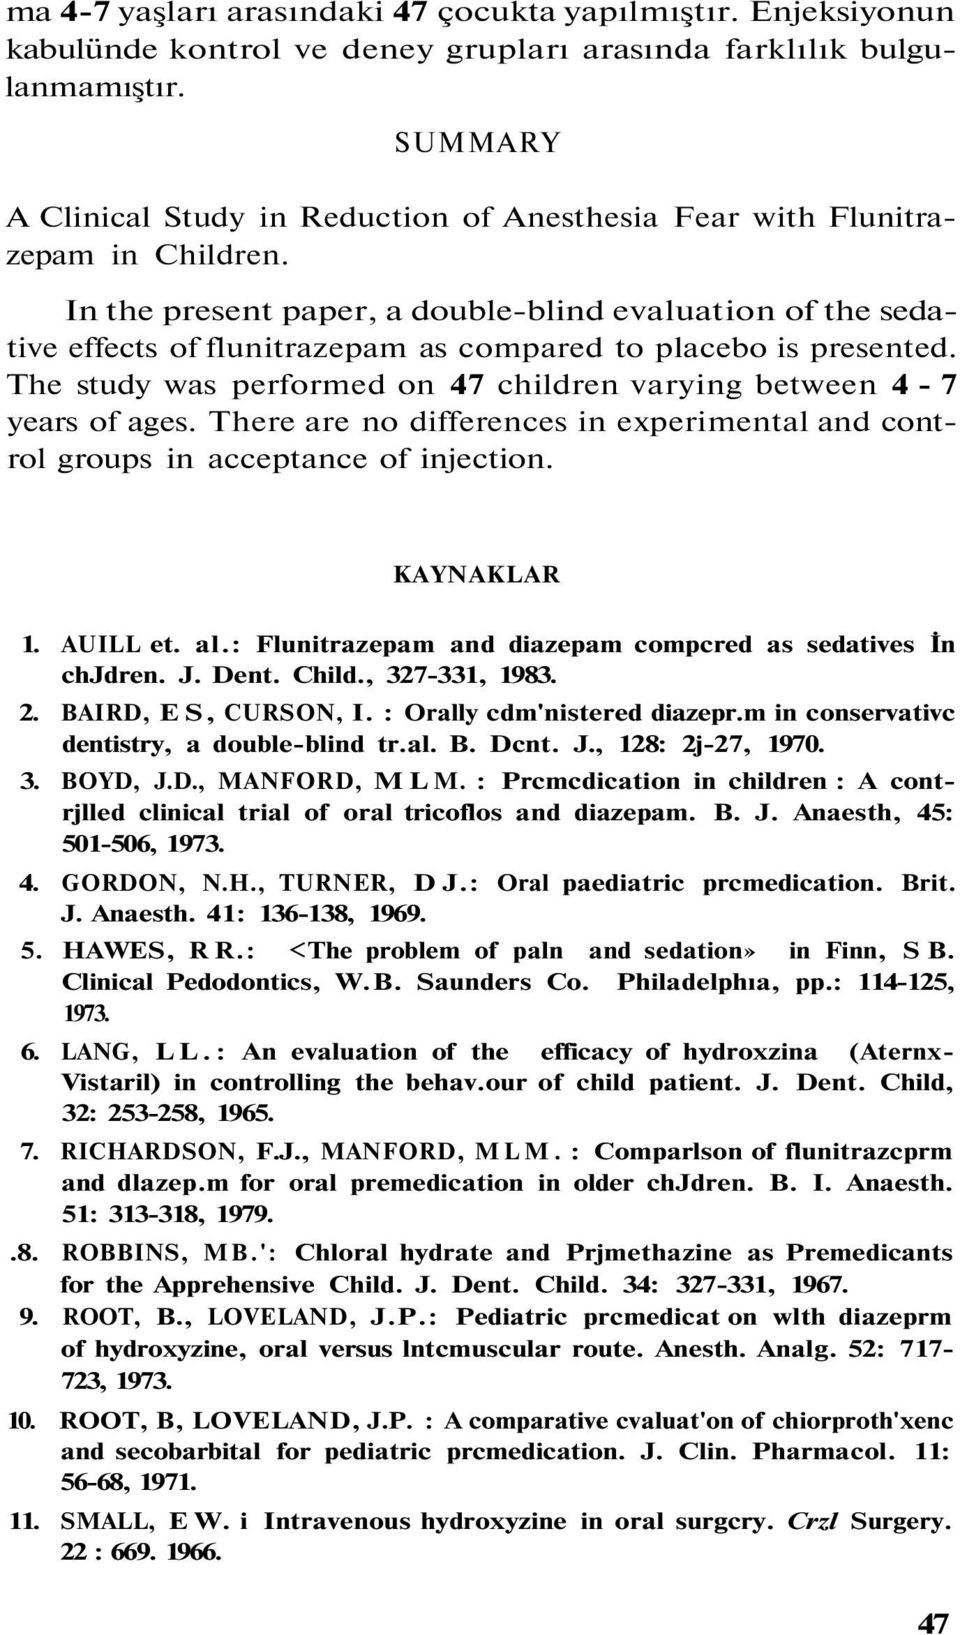 In the present paper, a double-blind evaluation of the sedative effects of flunitrazepam as compared to placebo is presented. The study was performed on 47 children varying between 4-7 years of ages.